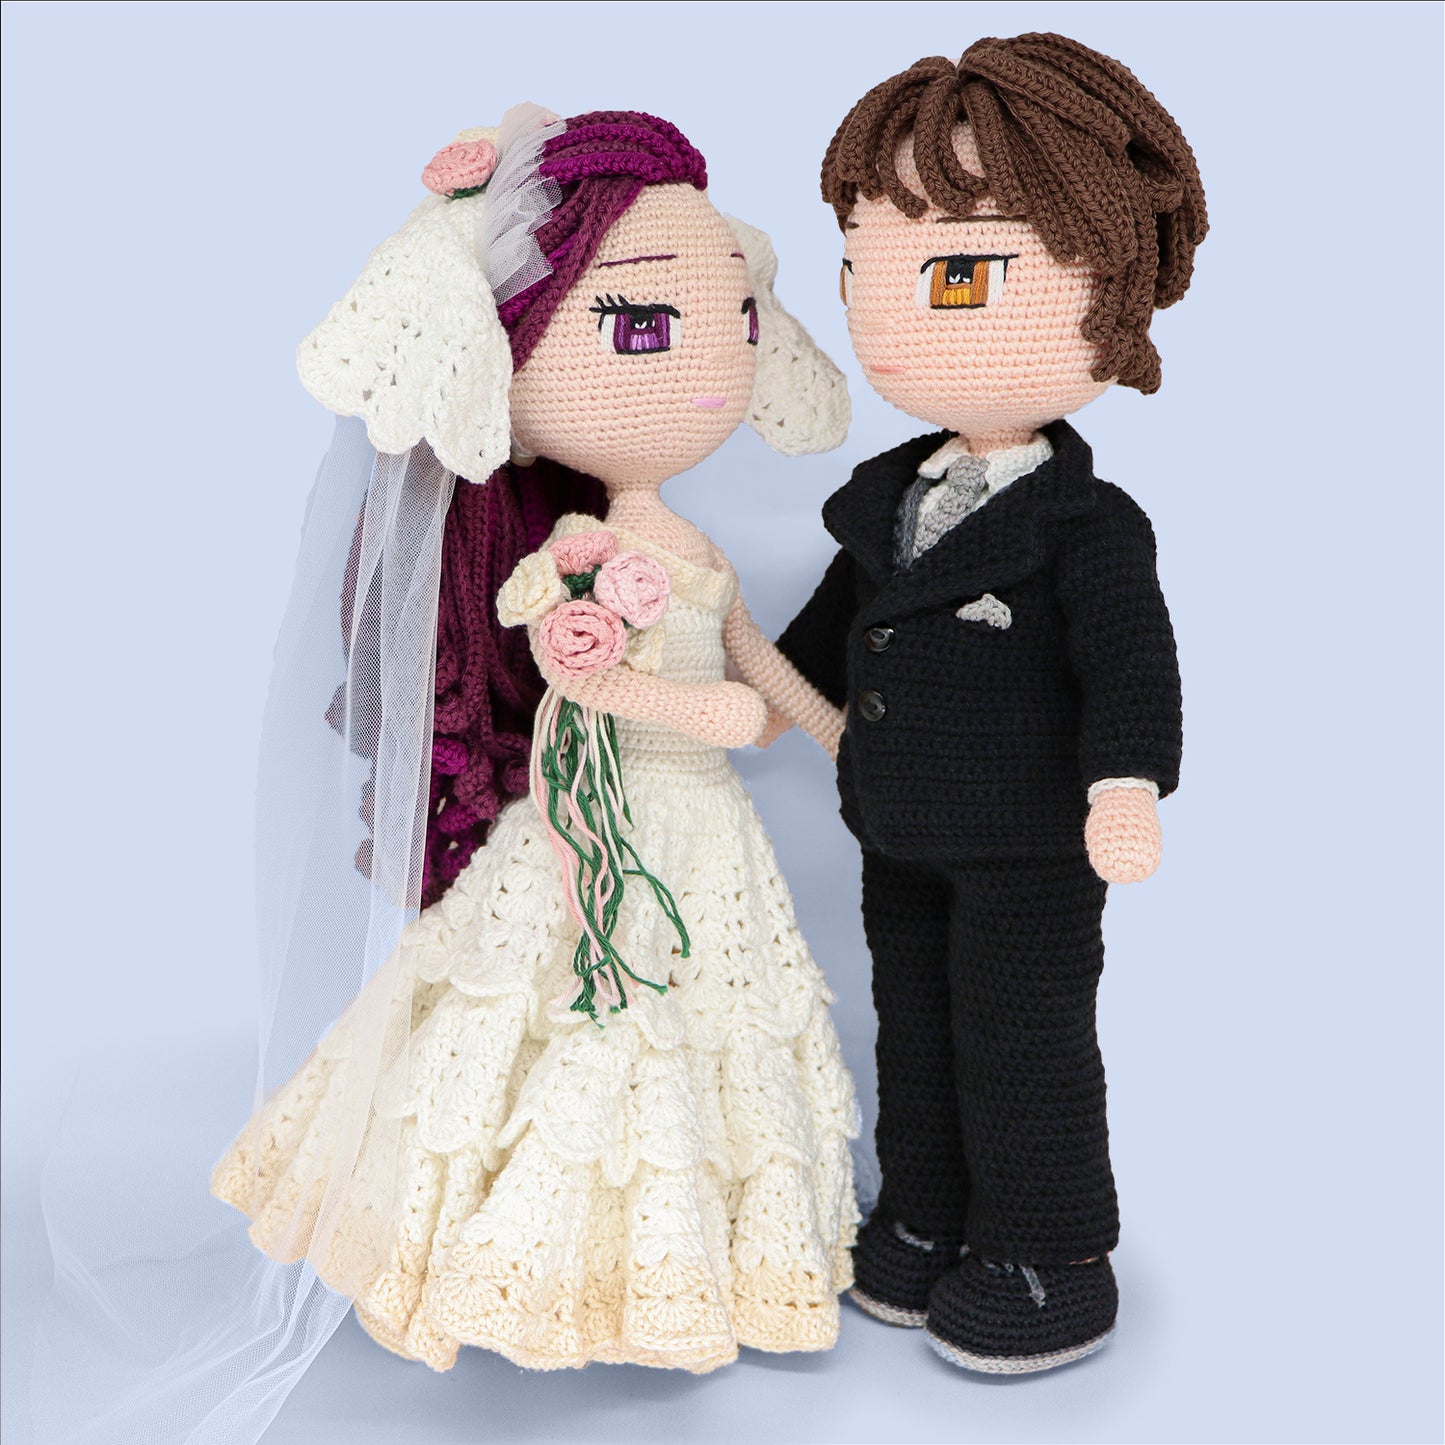 Ethan the Groom Doll Pattern